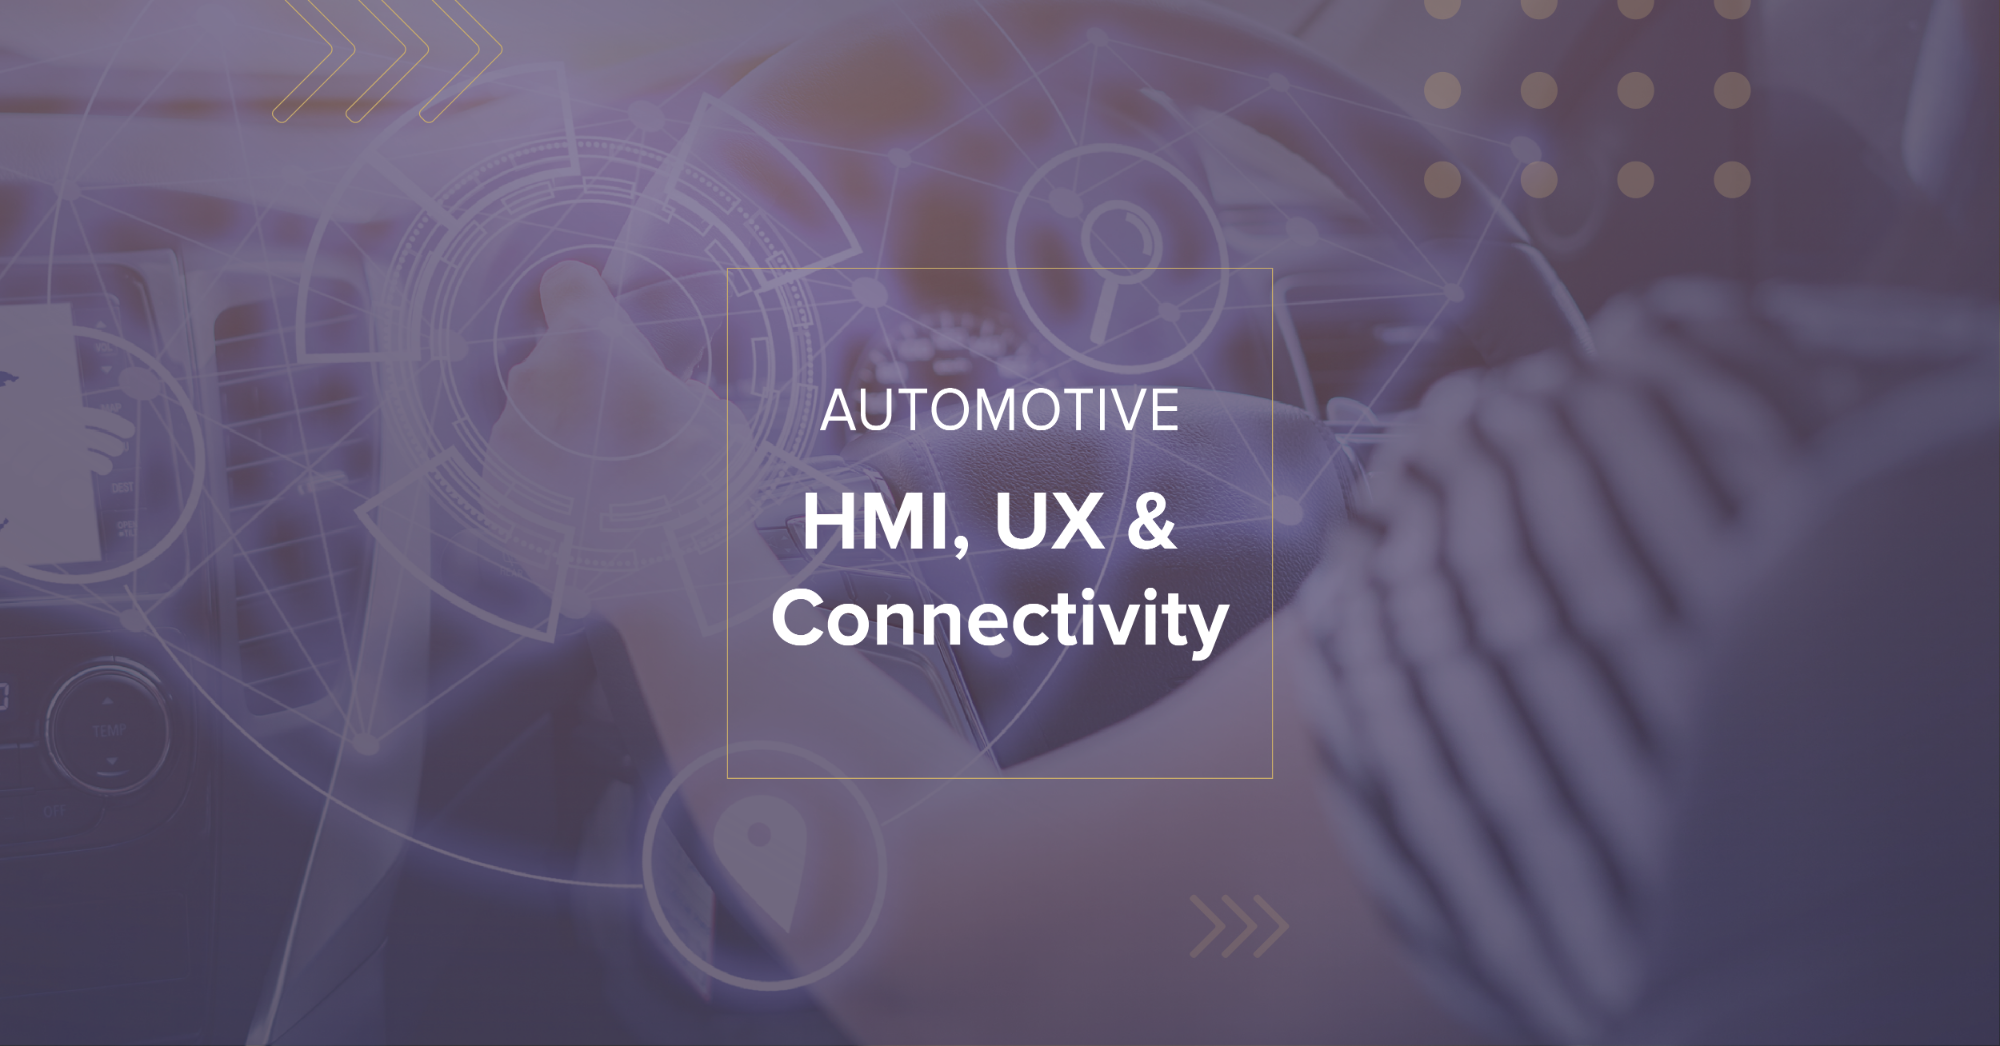 First day of our Triple Automotive event explored the area of HMI, UX & Connectivity